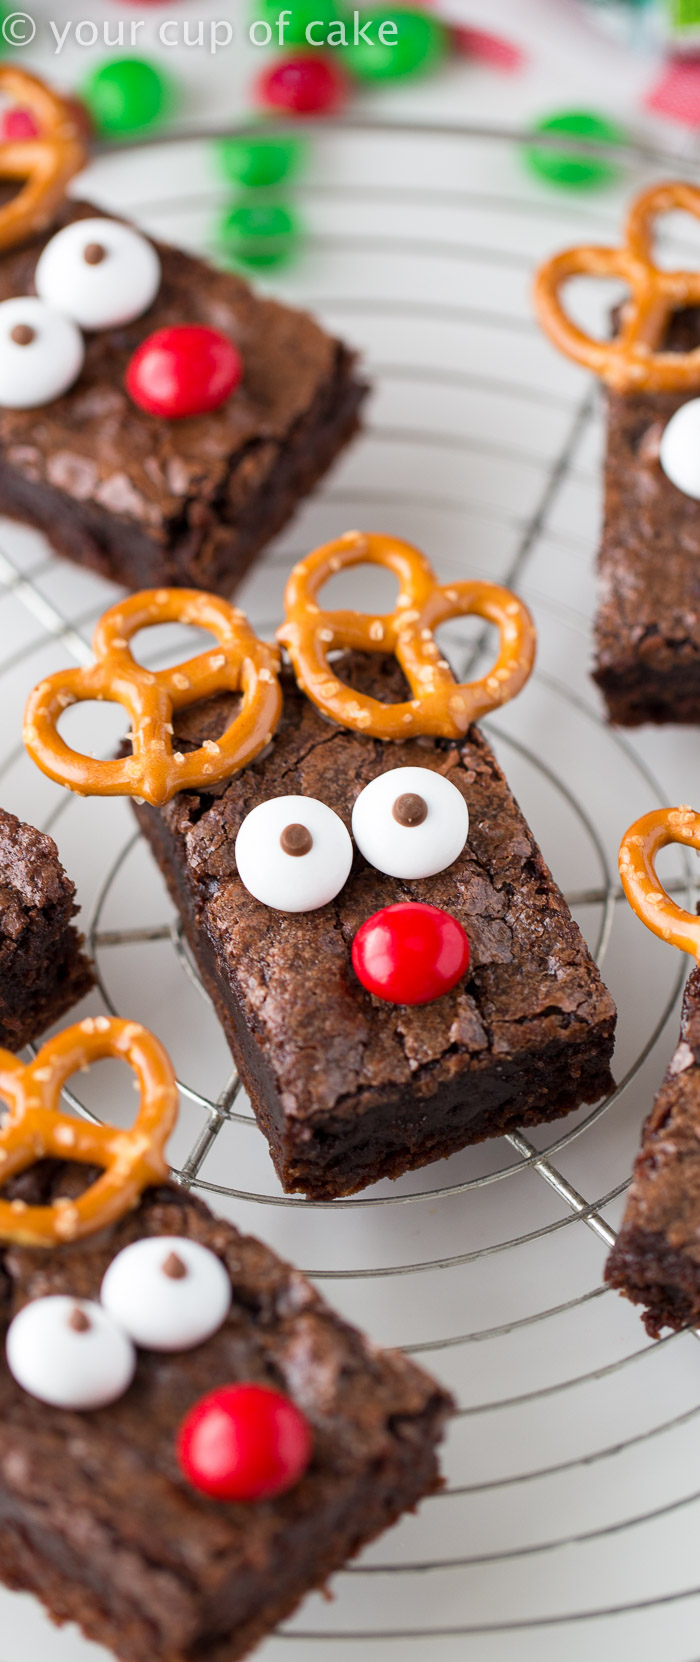 Rudolph the Red Nose Reindeer Brownies! An easy way to dress up brownies for Christmas